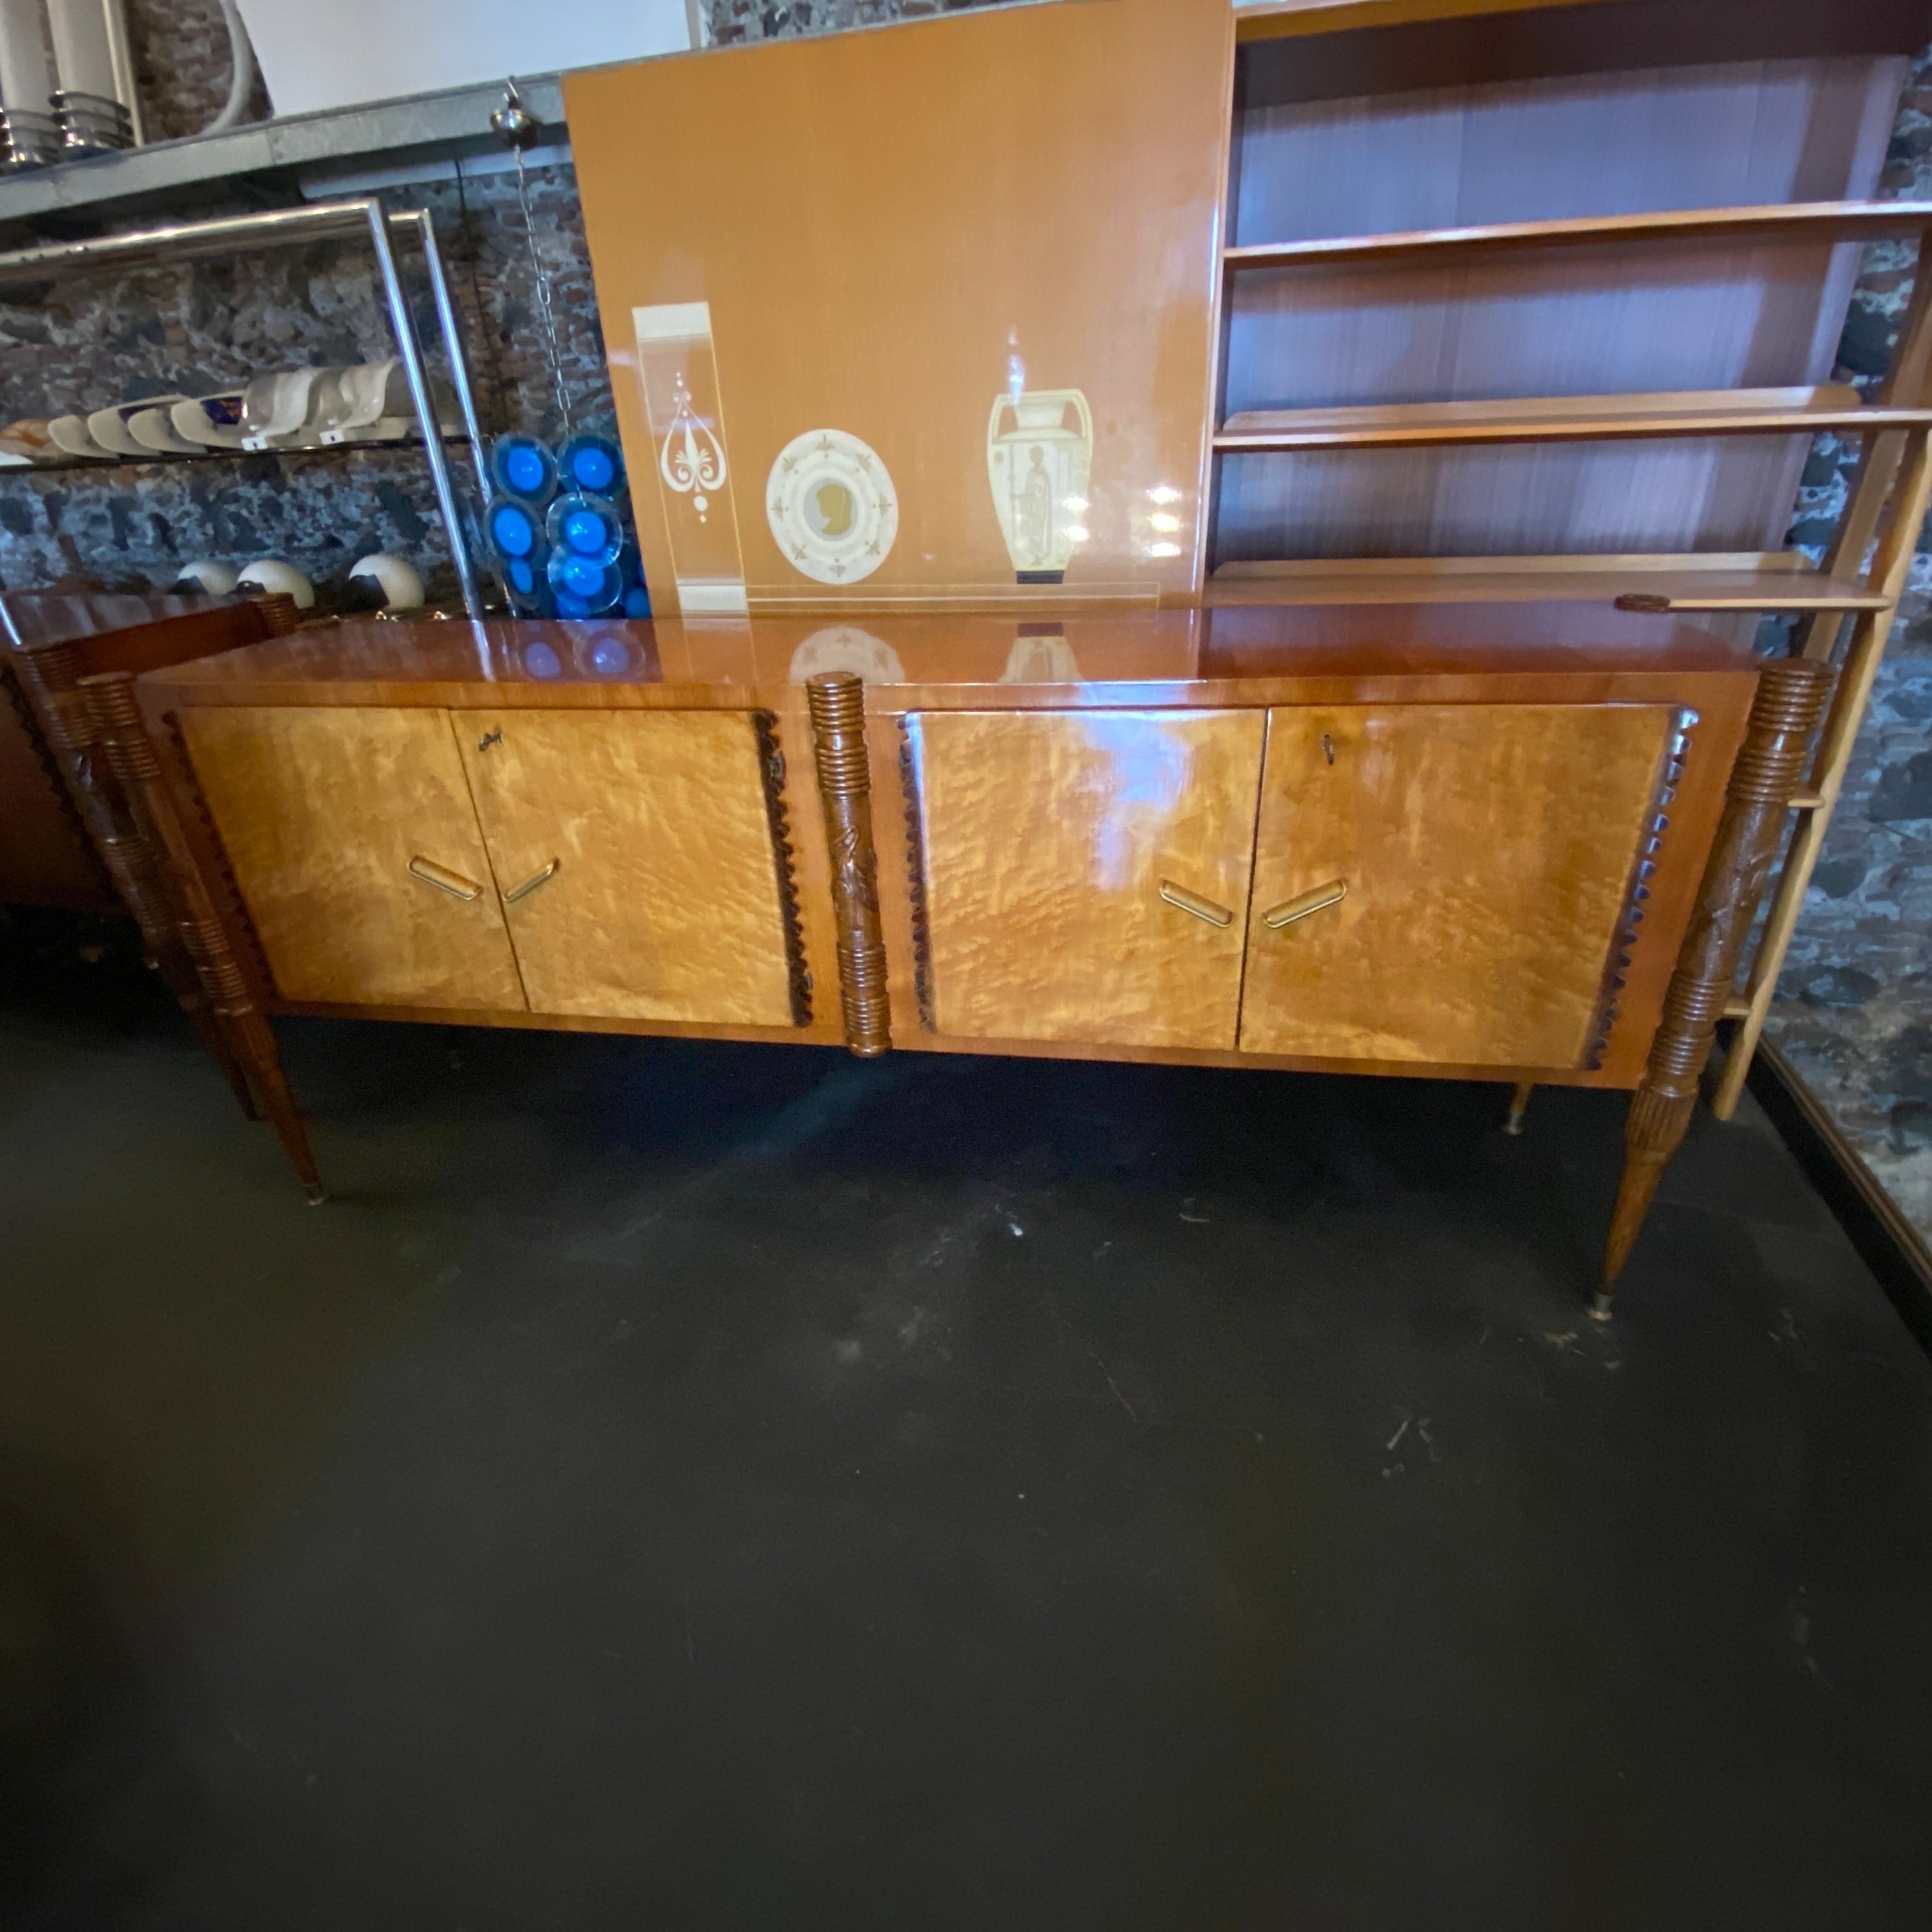 This Large Sideboard by Pier Luigi Colli is an exquisite and iconic piece of furniture that exemplifies the craftsmanship and design aesthetics of the mid-20th century. Pier Luigi Colli, an esteemed Italian designer was known for his mastery in